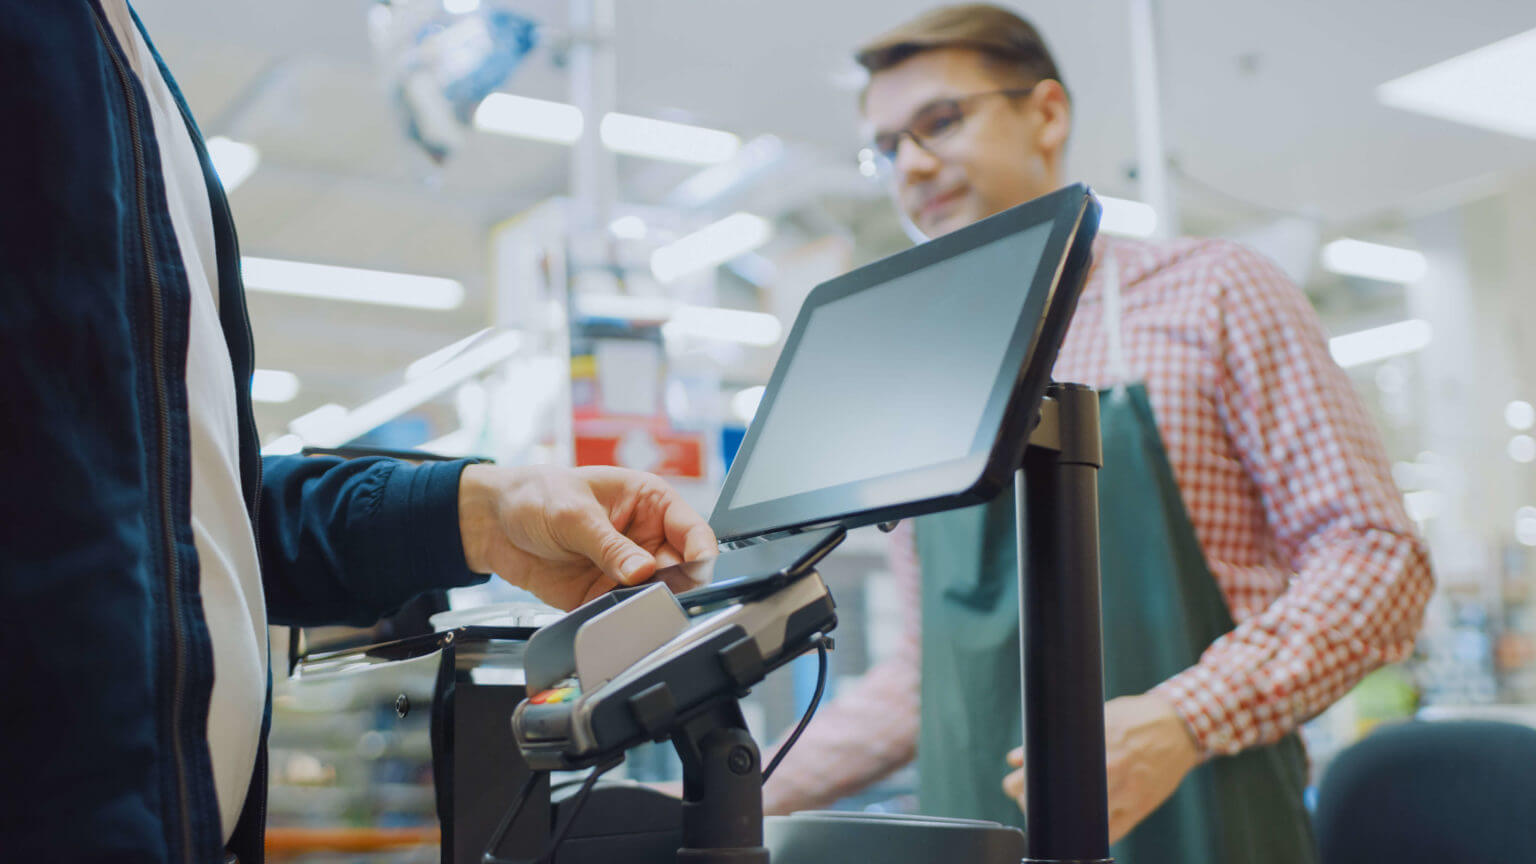 How much does a POS system cost? A POS price guide in 2022